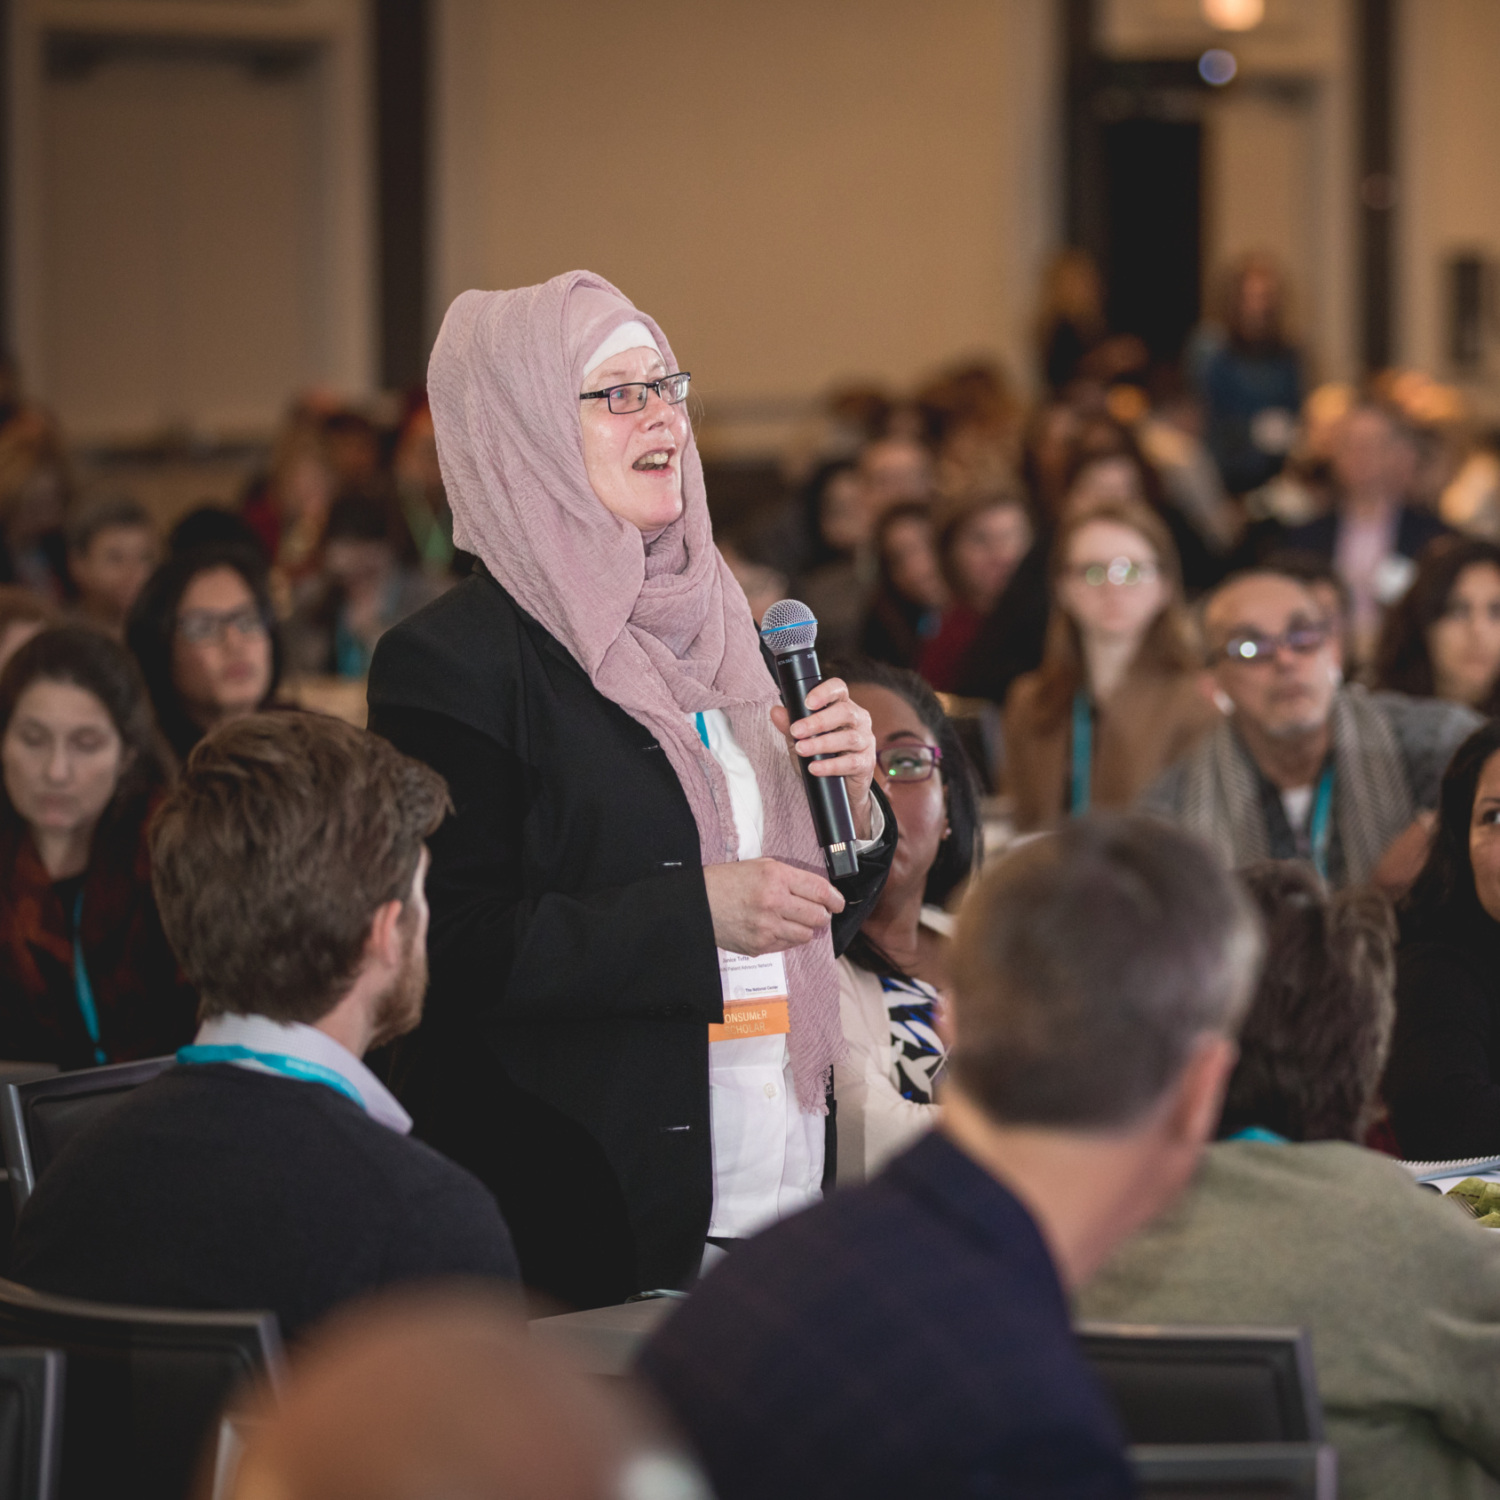 A person with lived experience speaks into a microphone standing among many people sitting at a conference